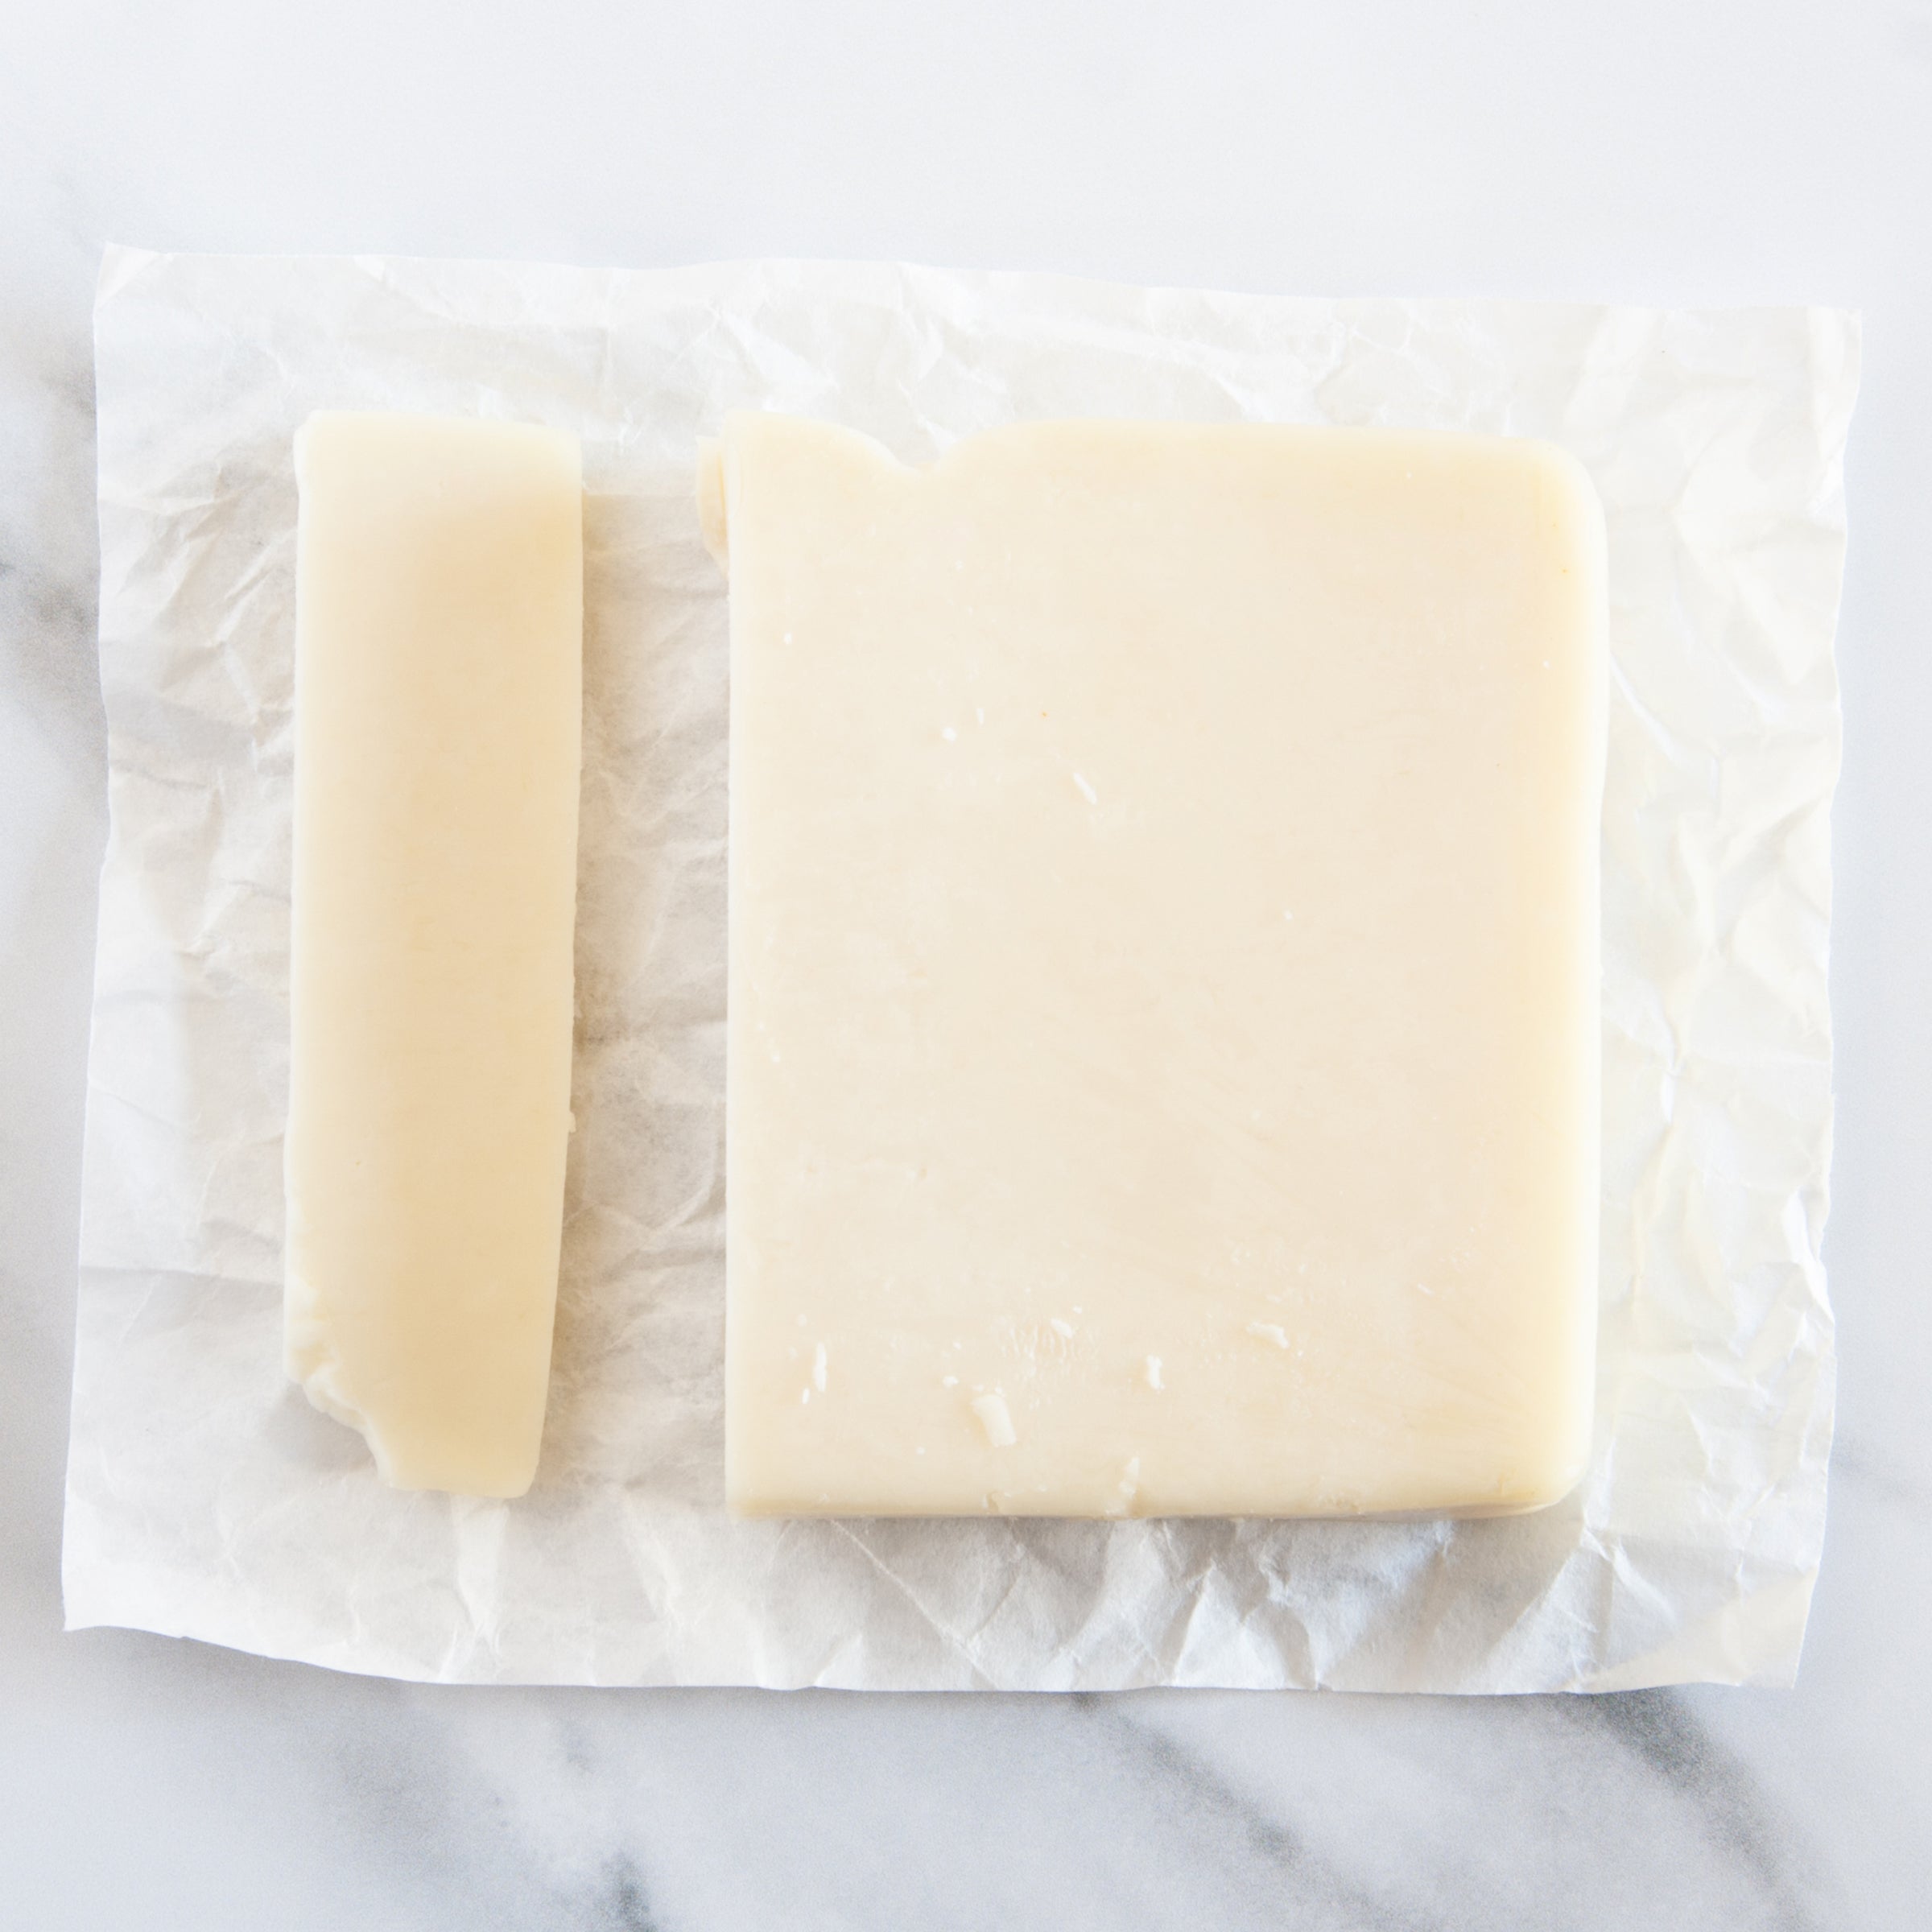 Queso Fresco, Specialty Cheeses